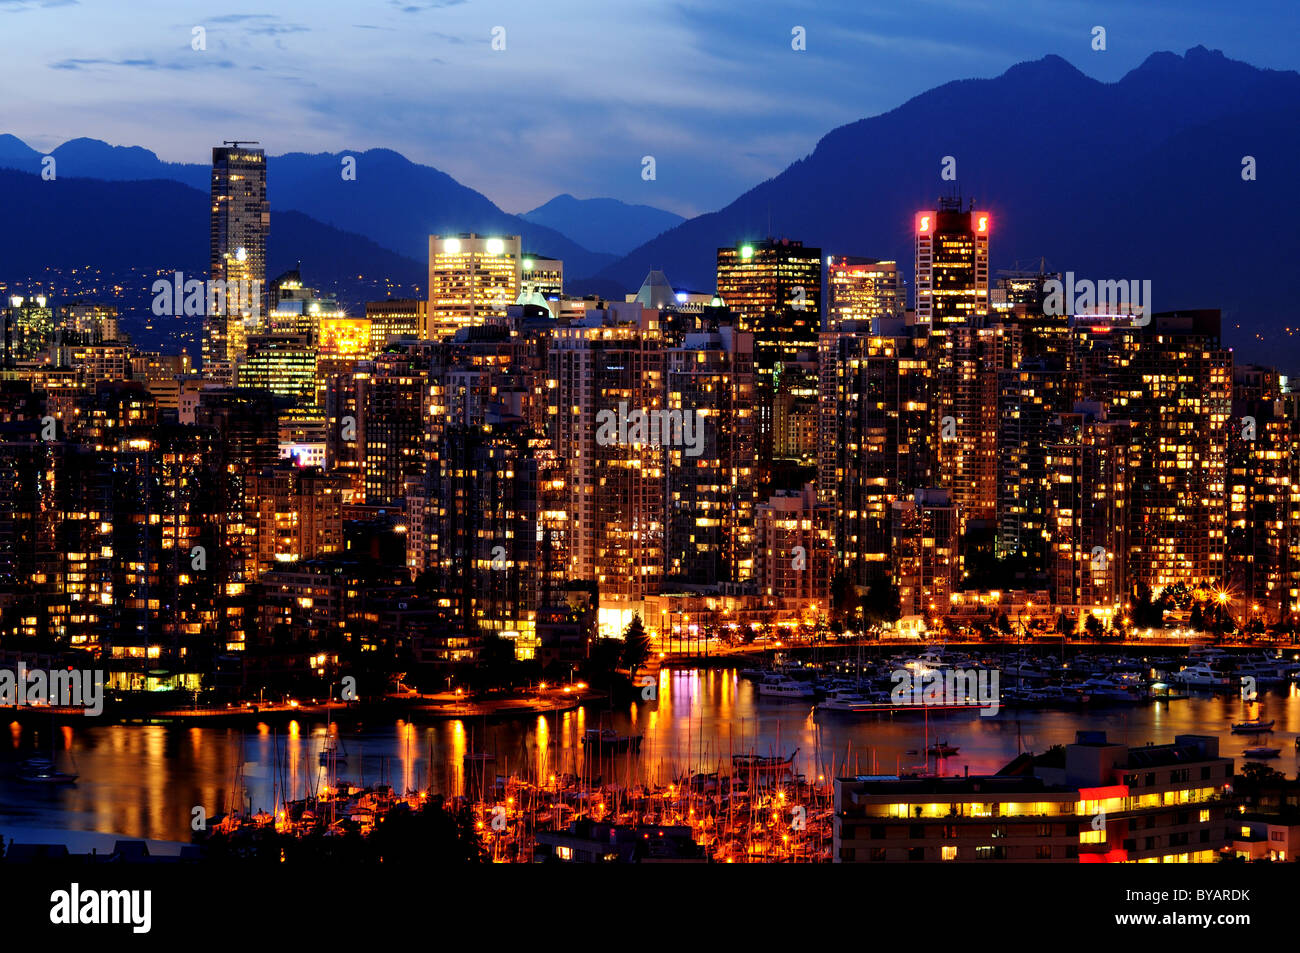 Vancouver, Canada at night Stock Photo